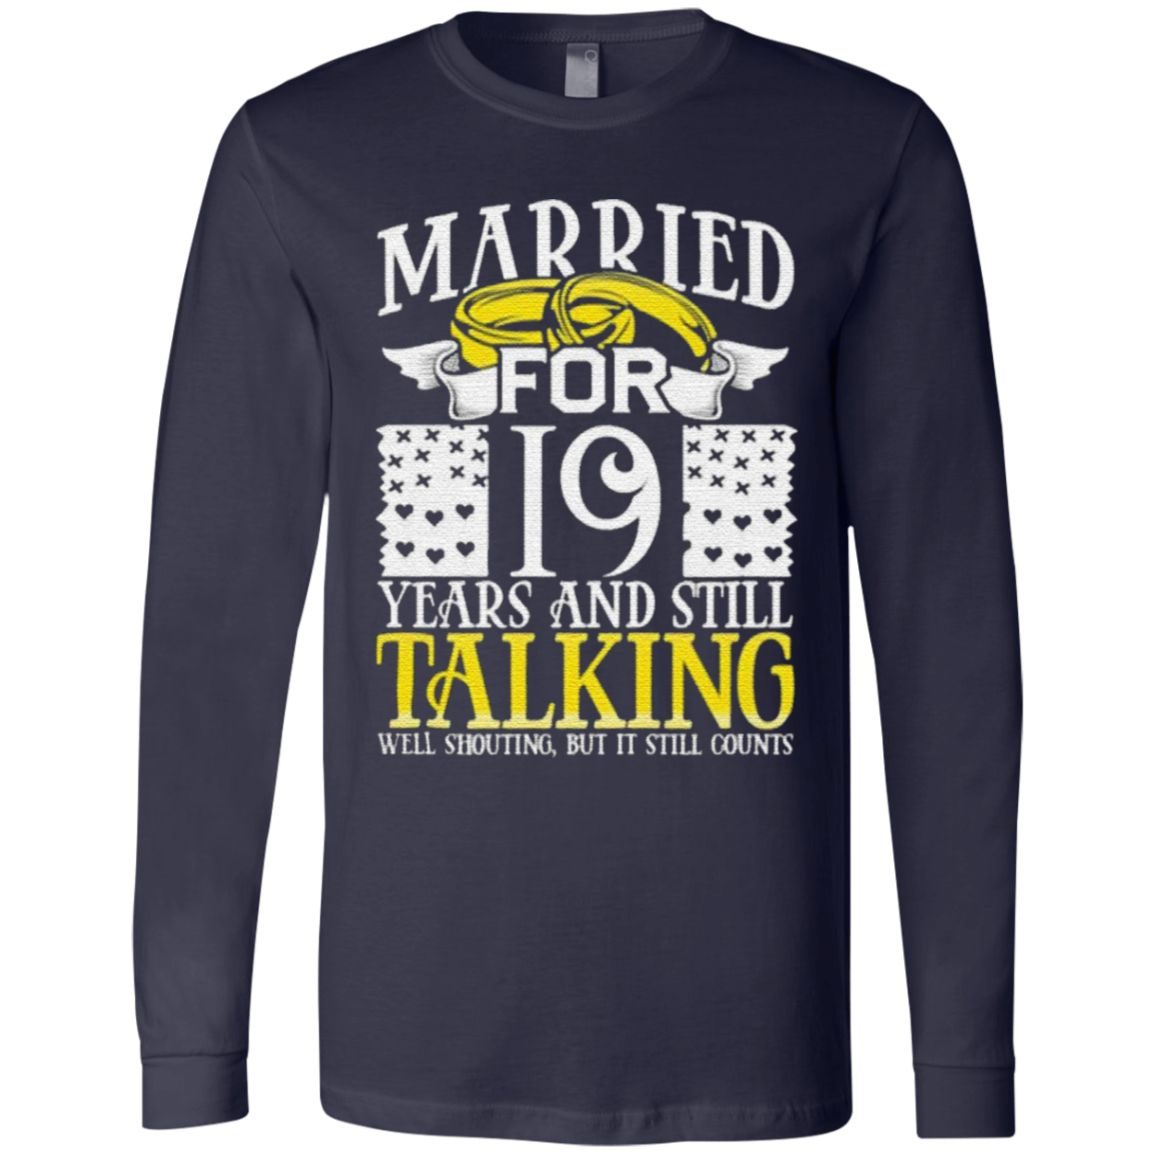 19th Wedding Anniversary for Wife Her Marriage shirt